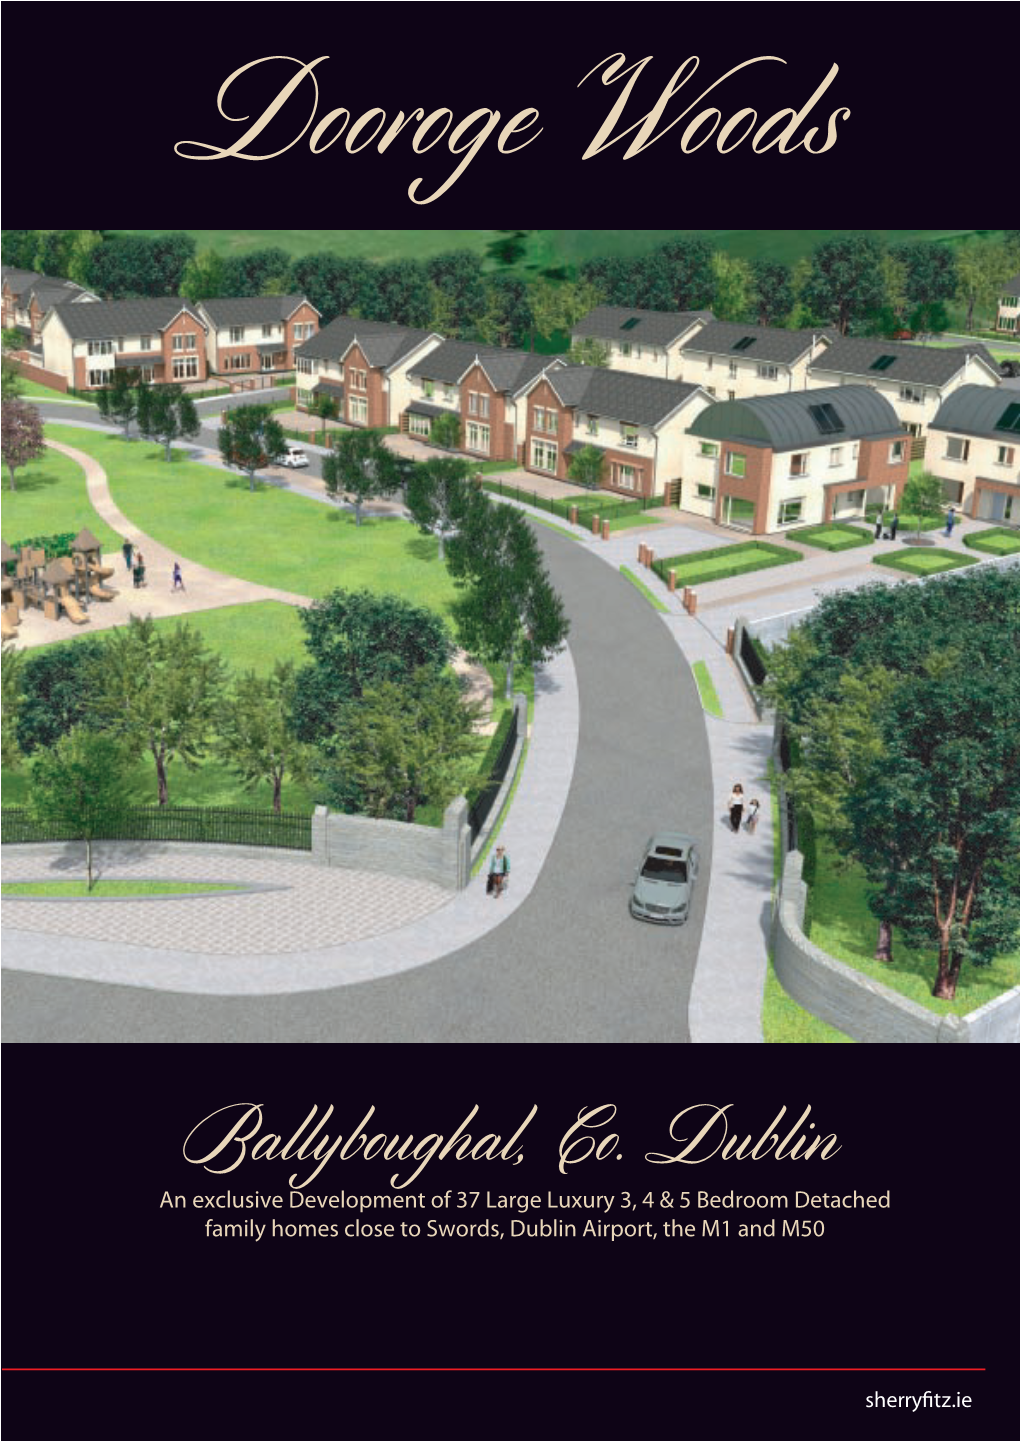 Ballyboughal, Co. Dublin an Exclusive Development of 37 Large Luxury 3, 4 & 5 Bedroom Detached Family Homes Close to Swords, Dublin Airport, the M1 and M50